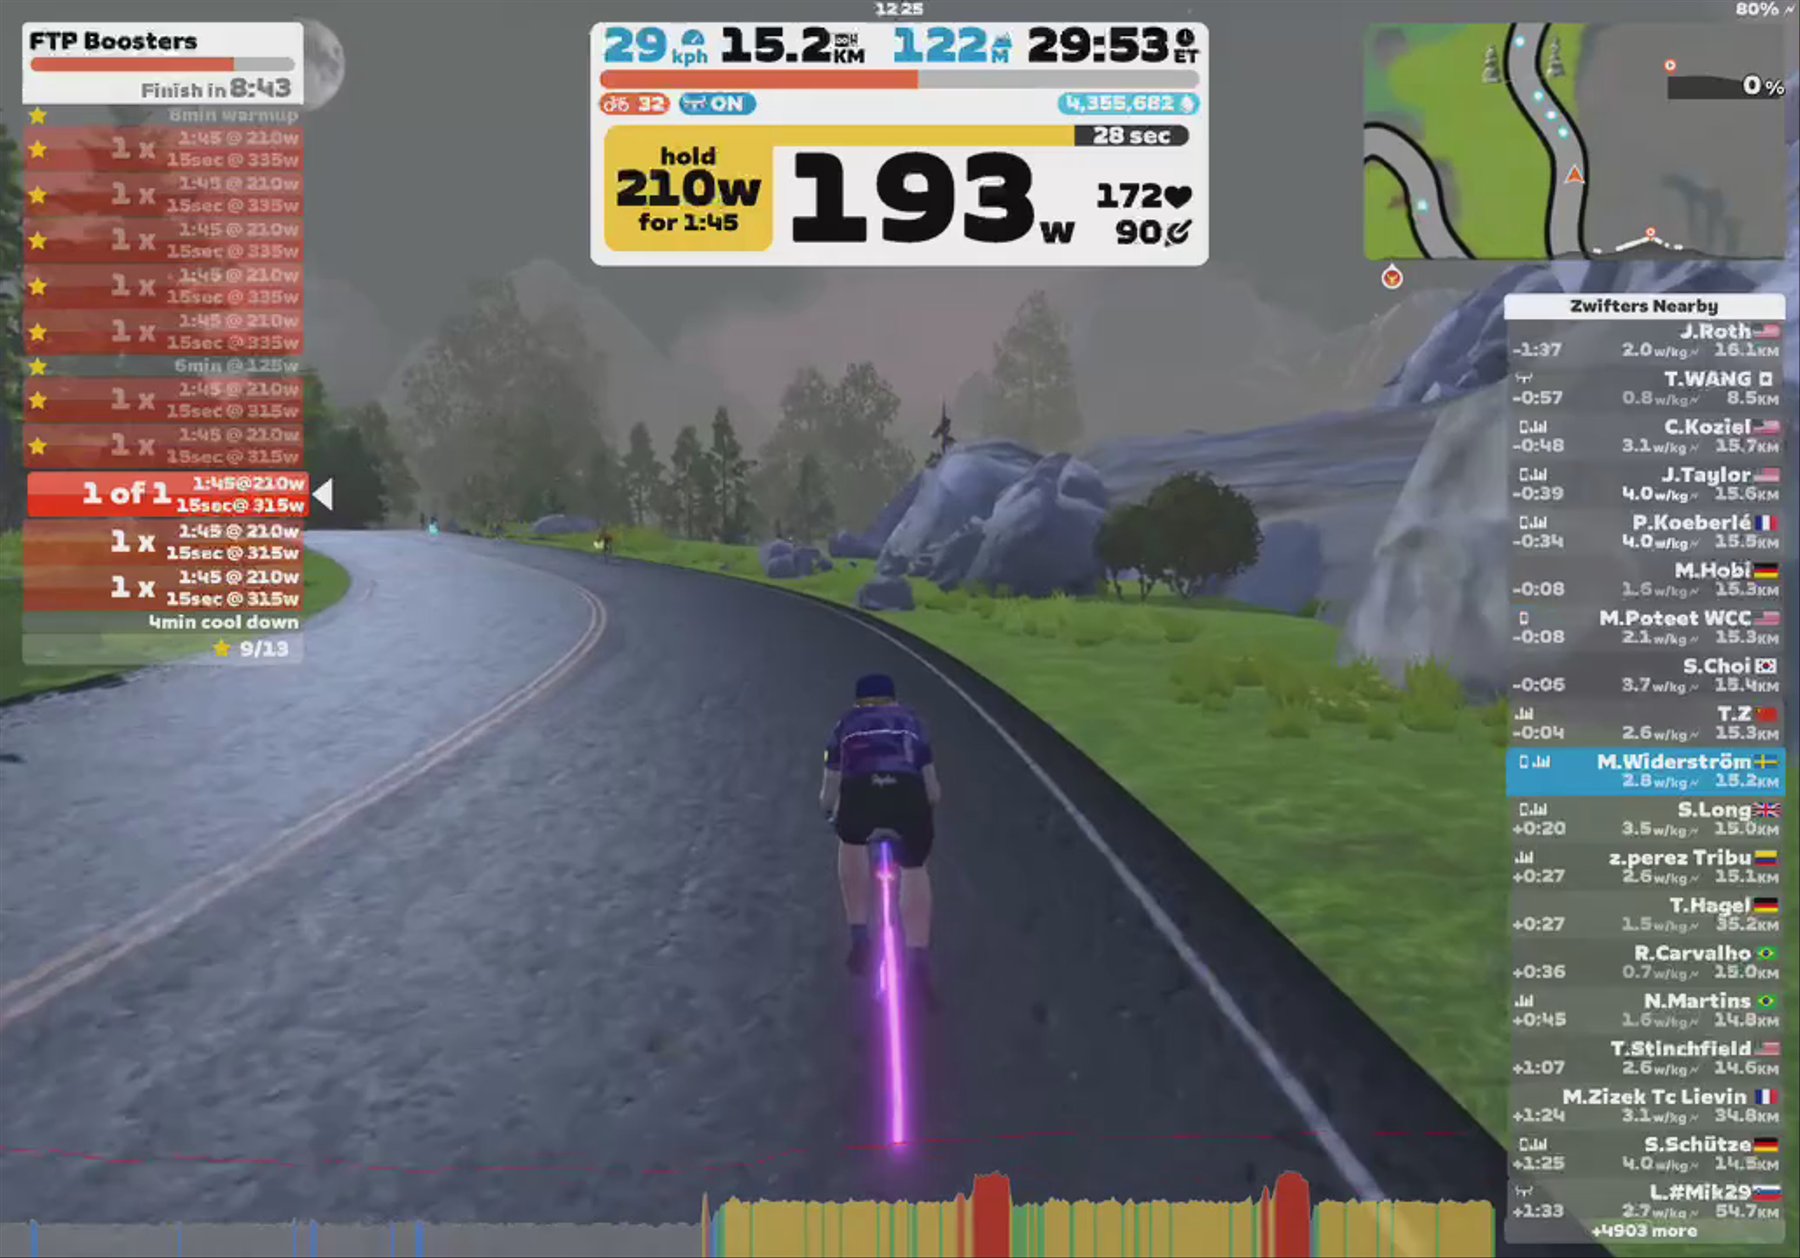 Zwift - Zwift Spring Training | FTP Boosters in Watopia